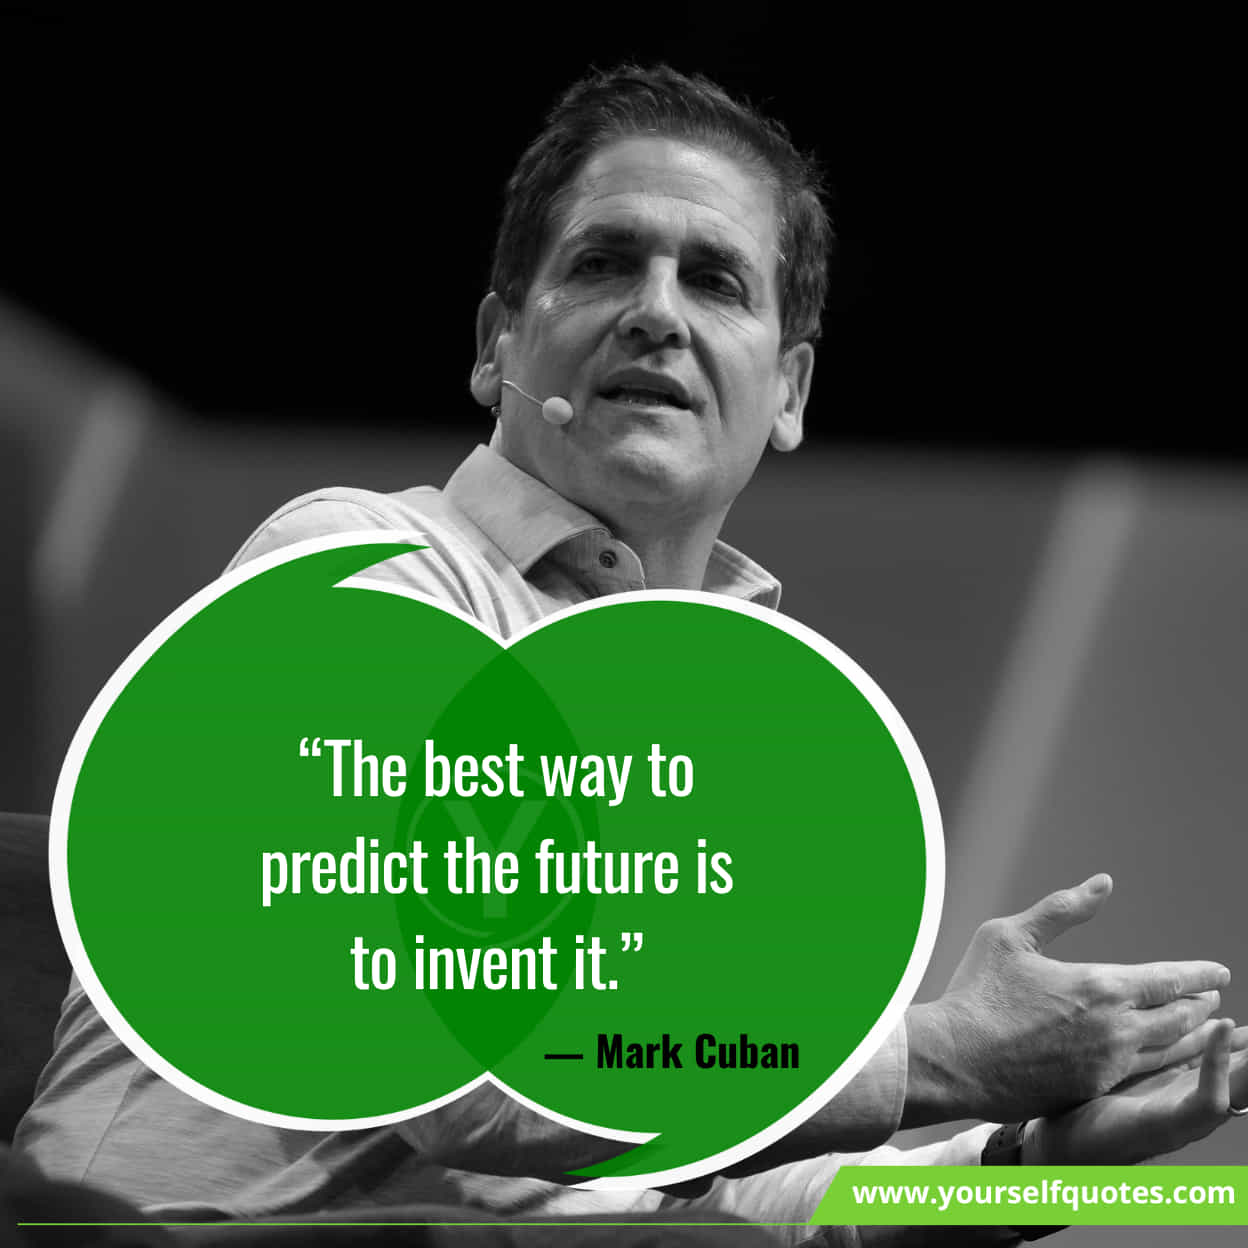 Inspirational quotes by Mark Cuban